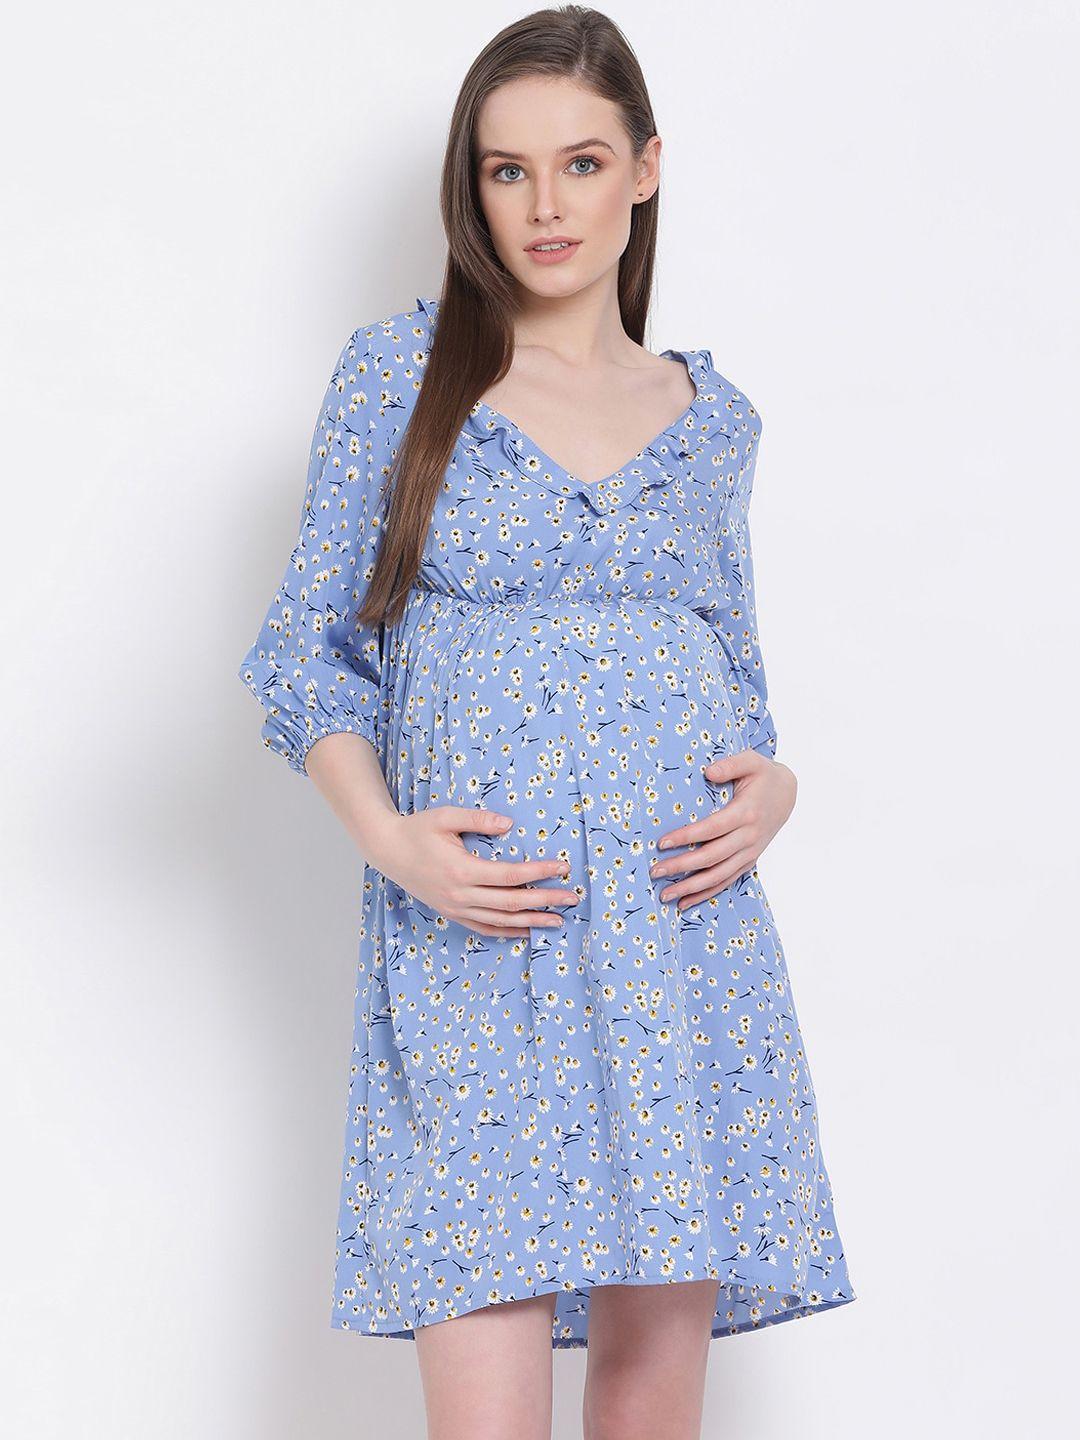 oxolloxo women blue printed fit and flare maternity dress